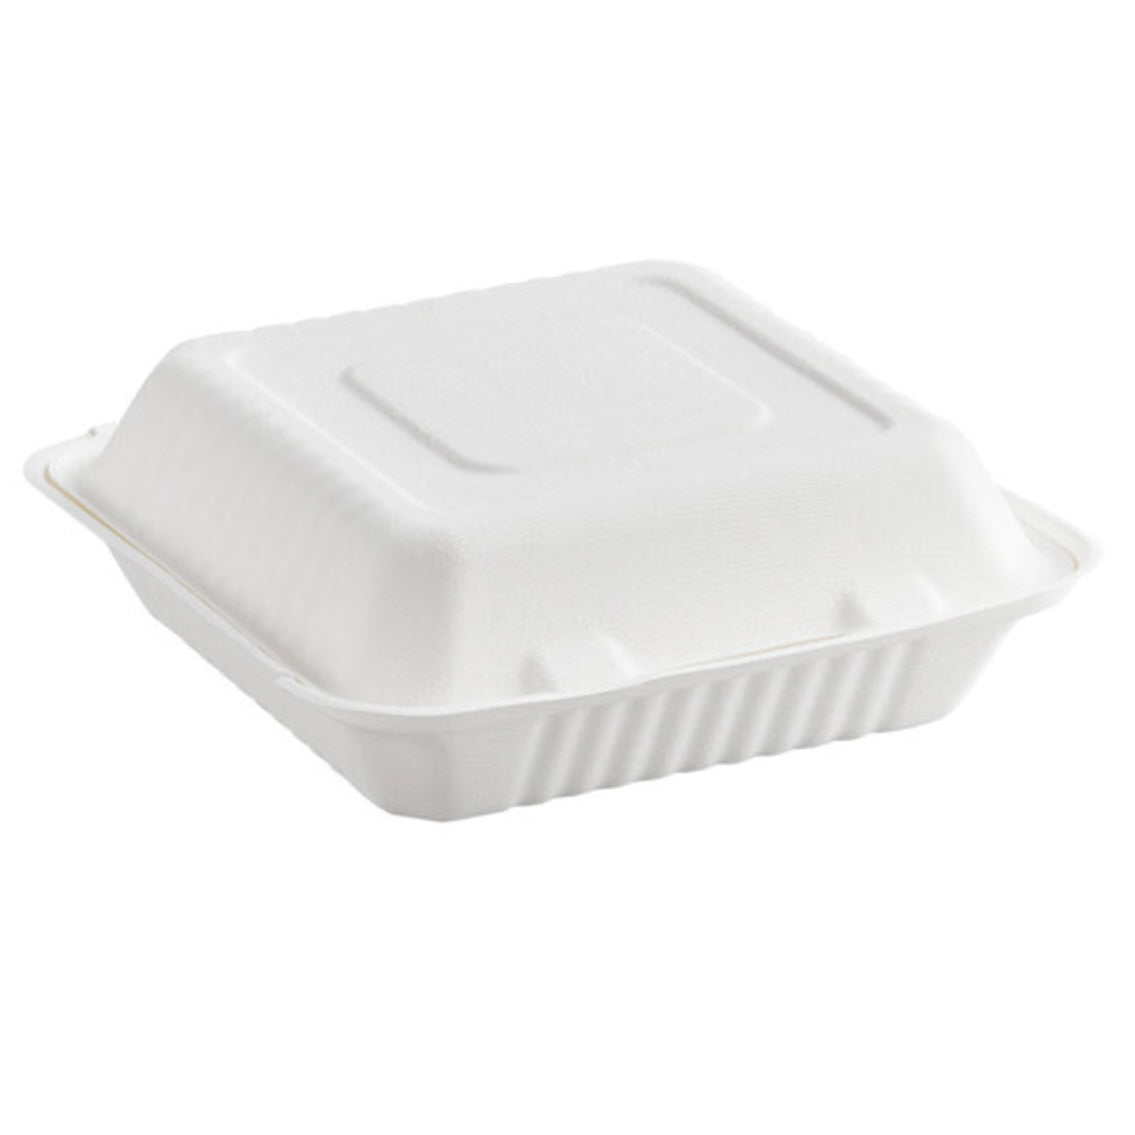 9" x 9" x 3" Compostable Sugarcane/Bagasse One-Compartment Clamshell Take-Out Box - 200/Case